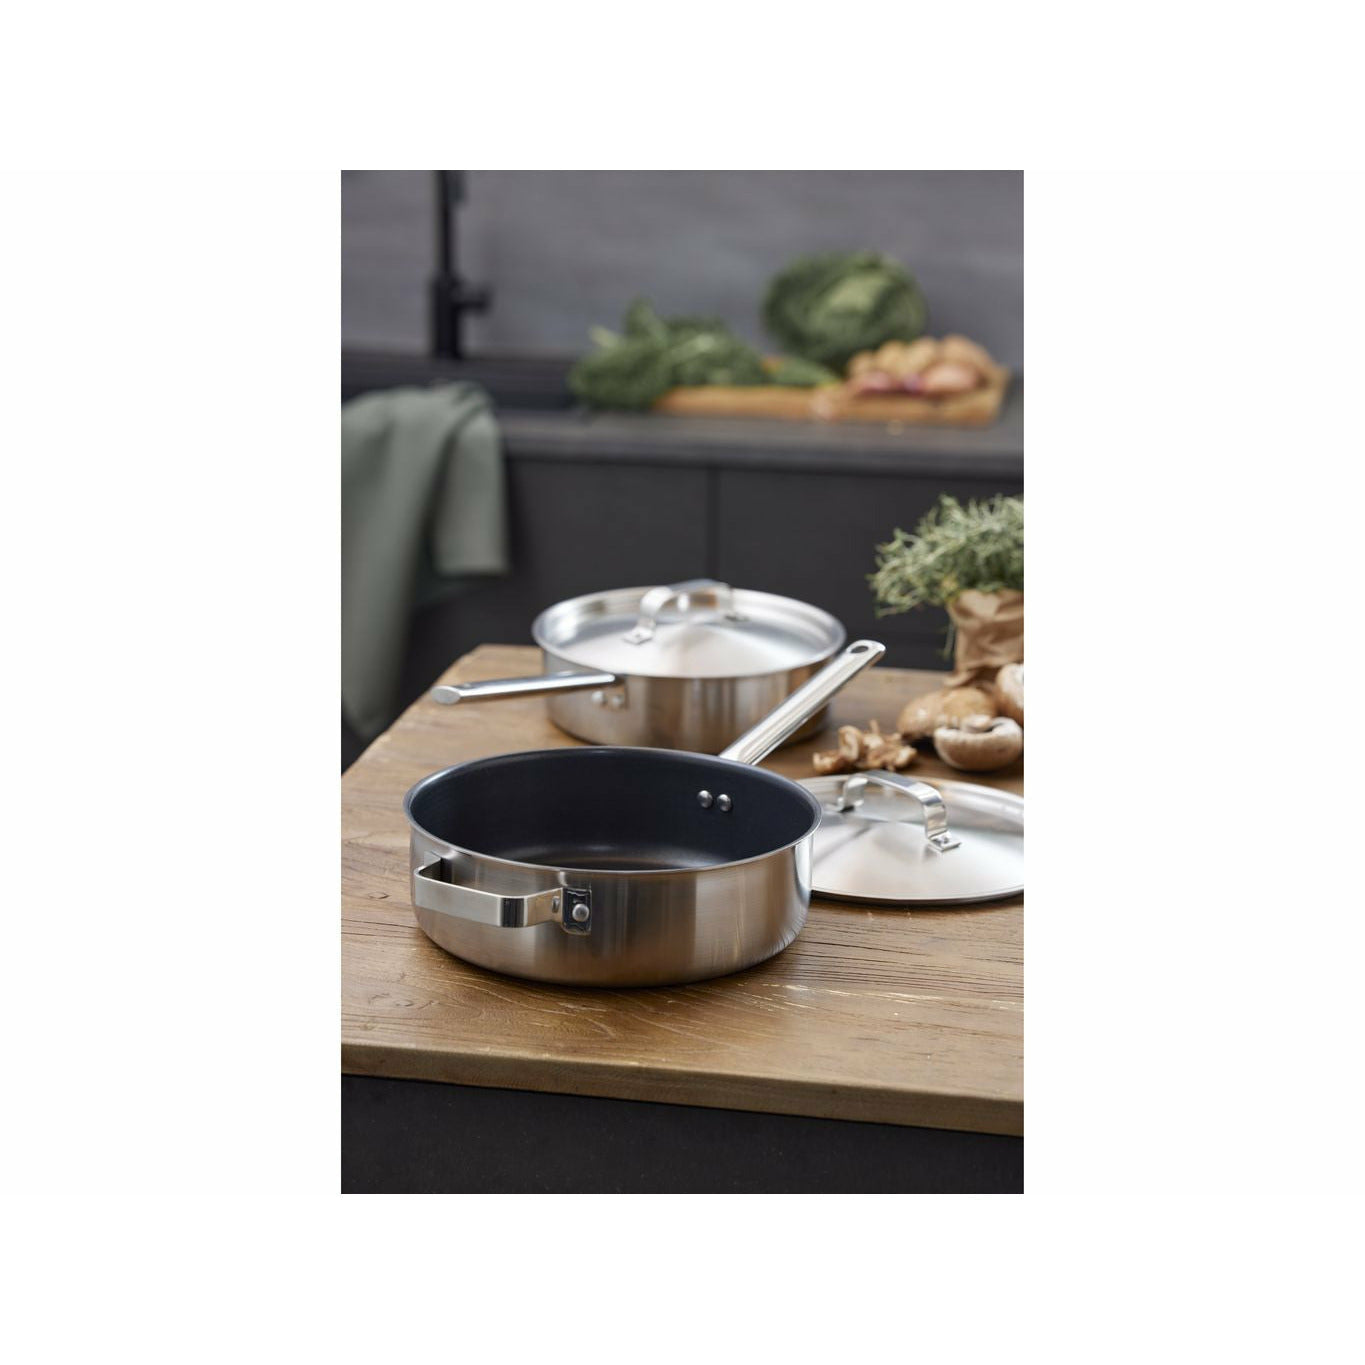 Pillivuyt Gourmet Somme Frying Pan With Lid Stainless Steel/Non Stick ø 26 Cm, Steel